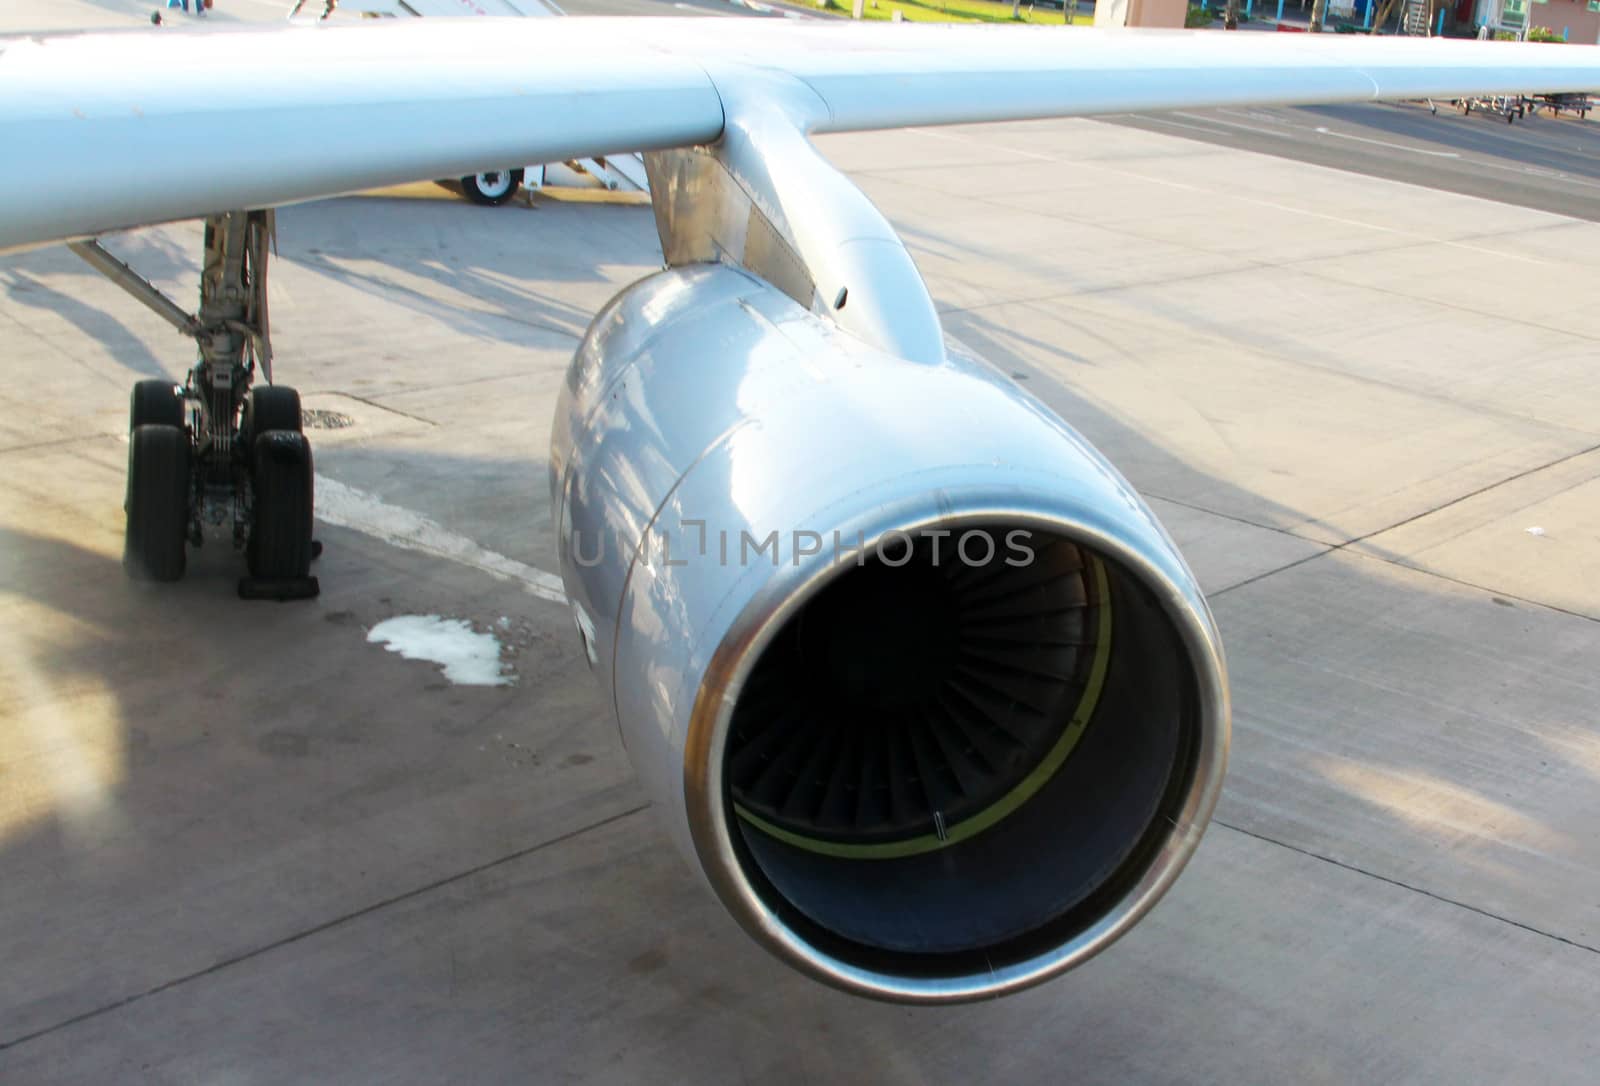 Aircraft wing with a turbine